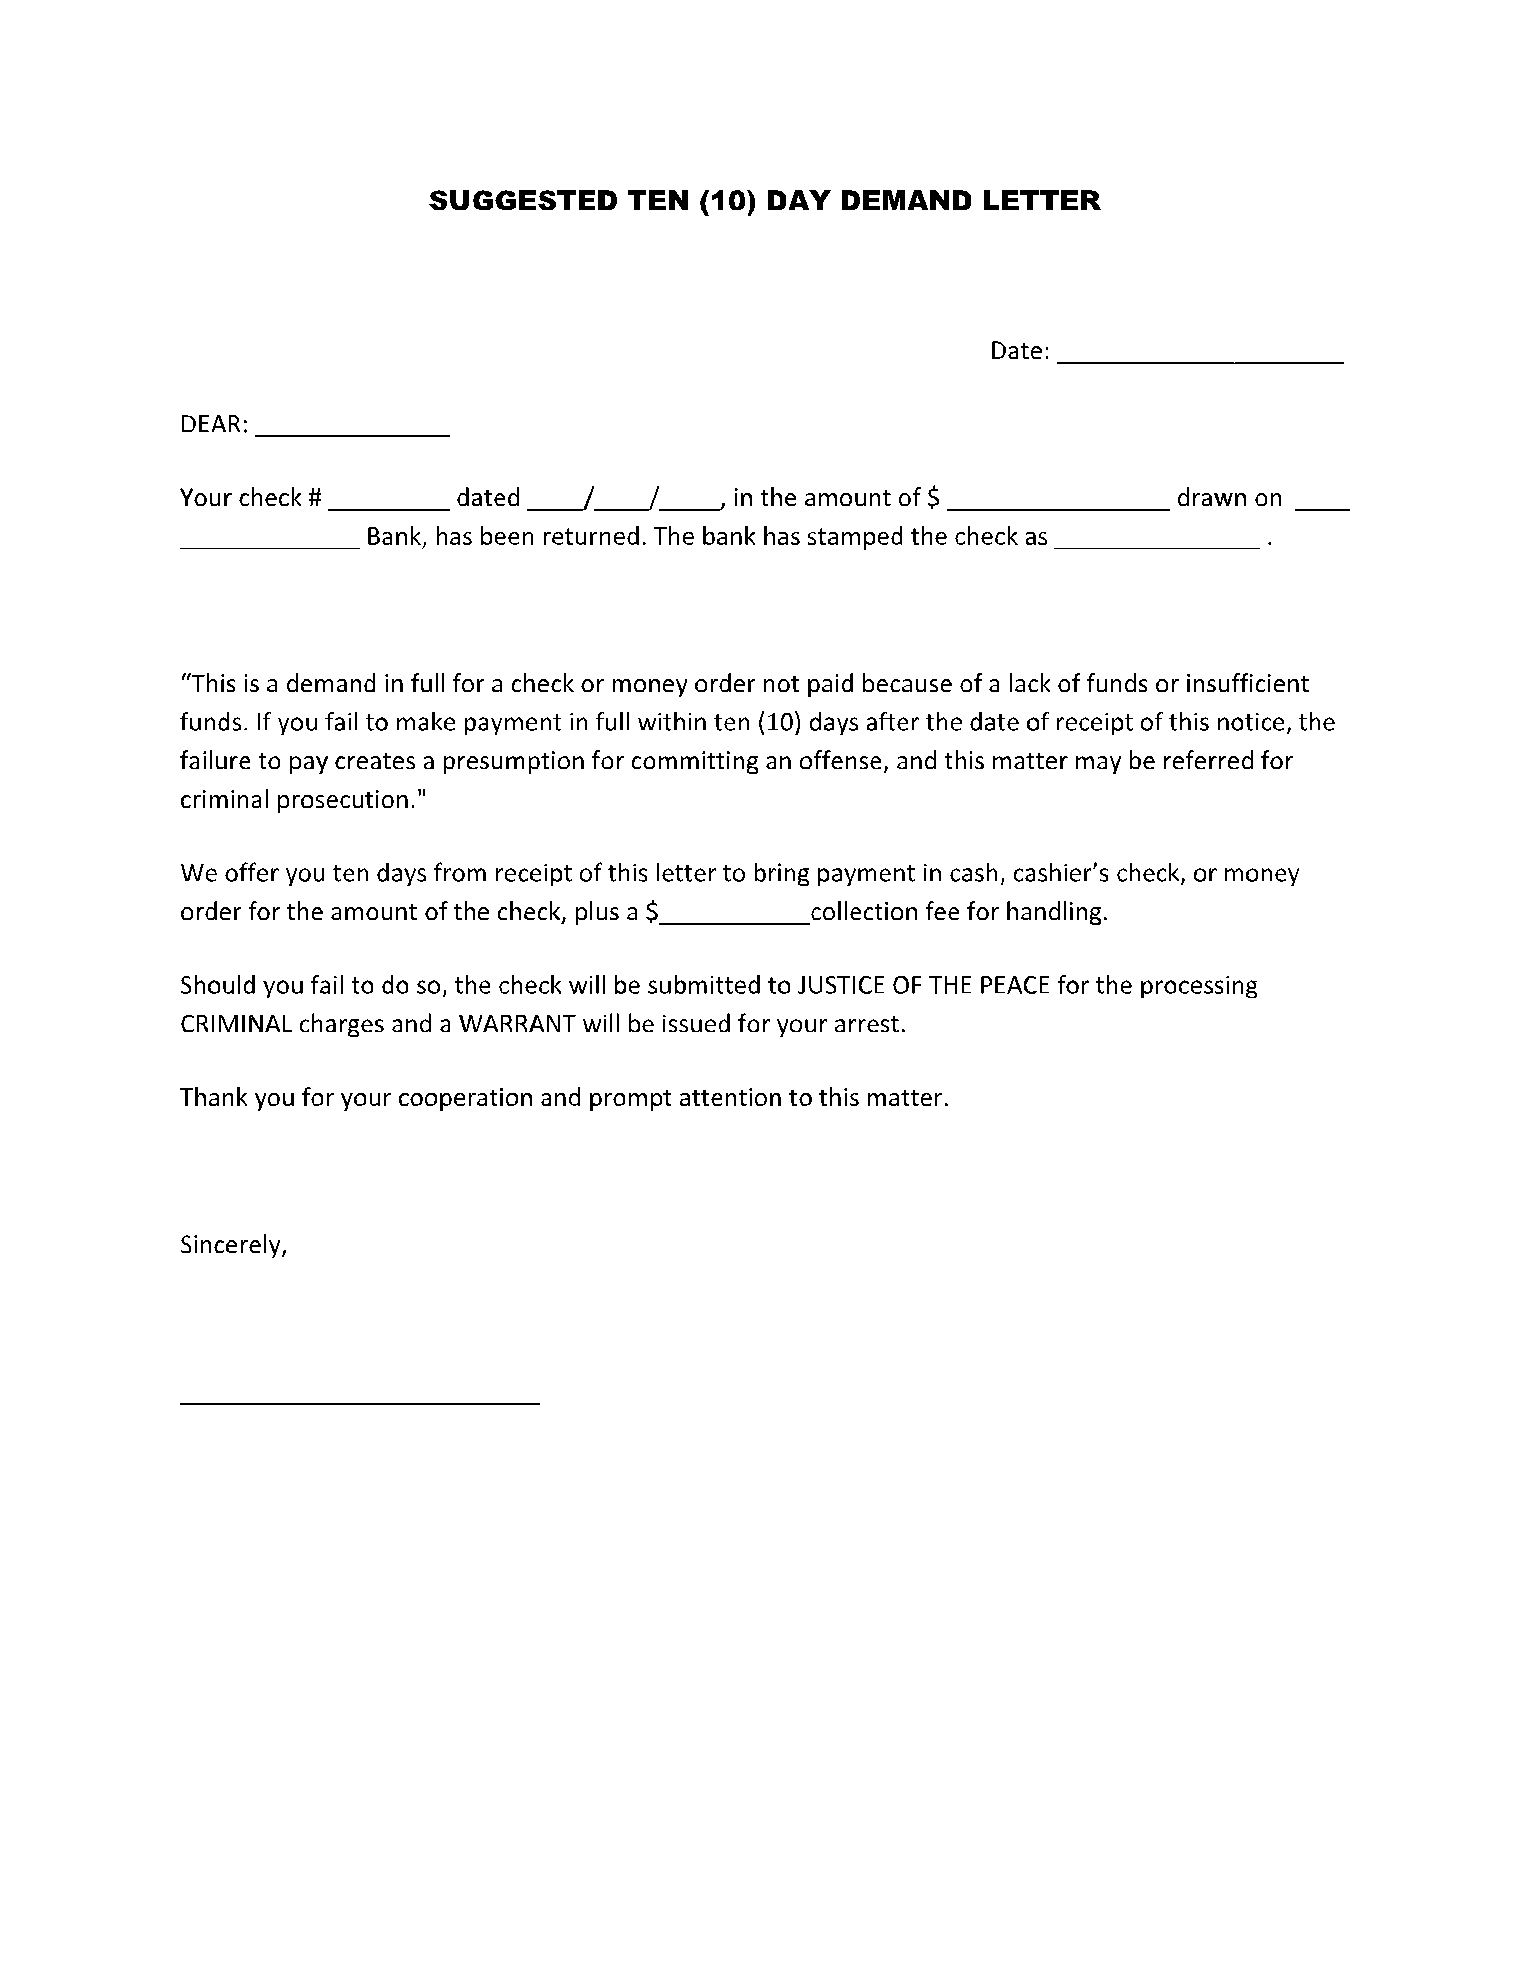 template letter for bank charges